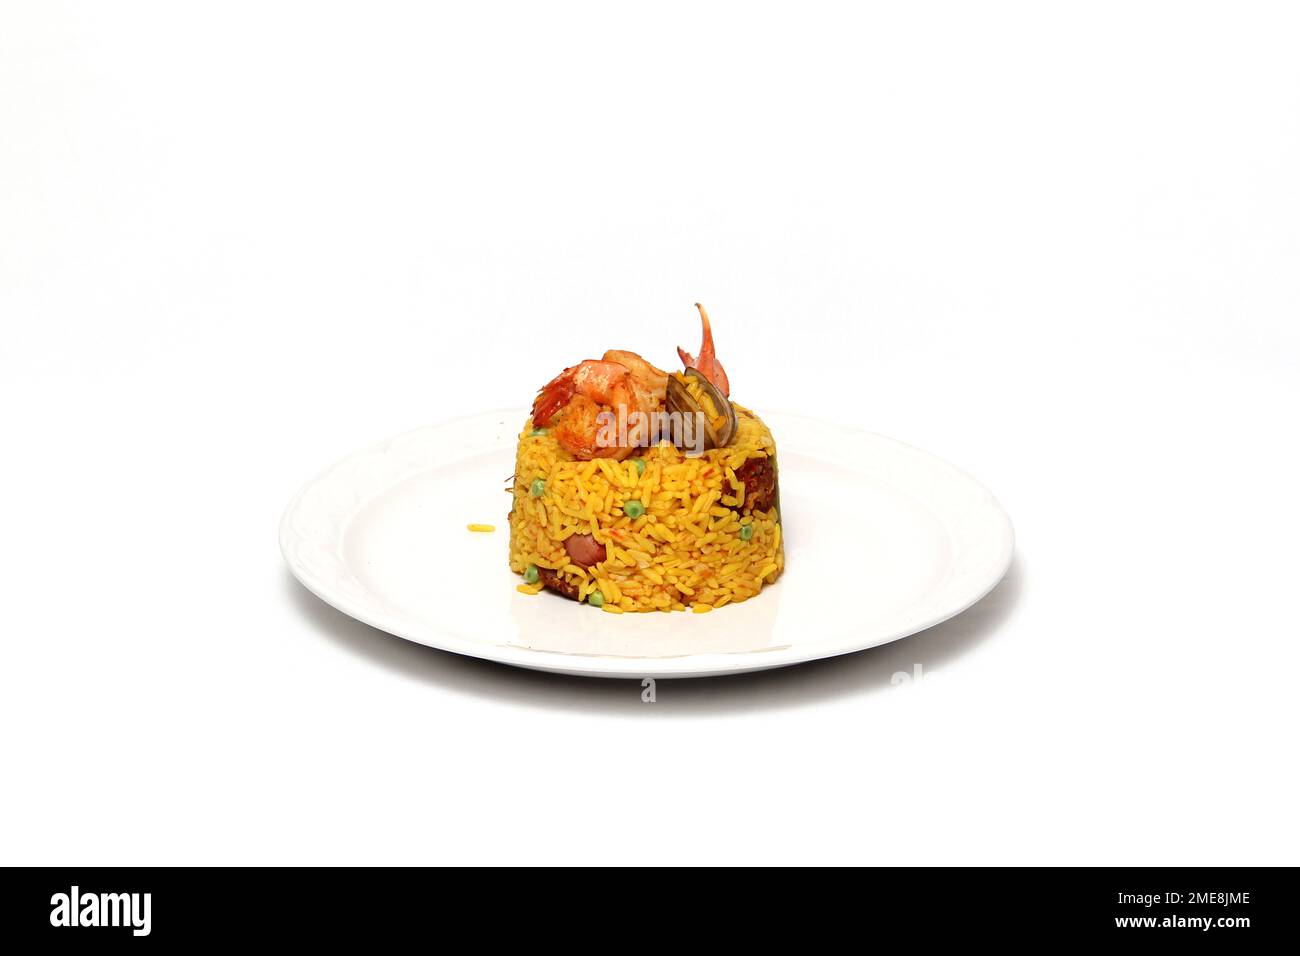 Paella rice is a traditional cuisine recipe from the city of Valencia Spain prepared with saffron, seafood, shrimp, vegetables served on a white plate Stock Photo